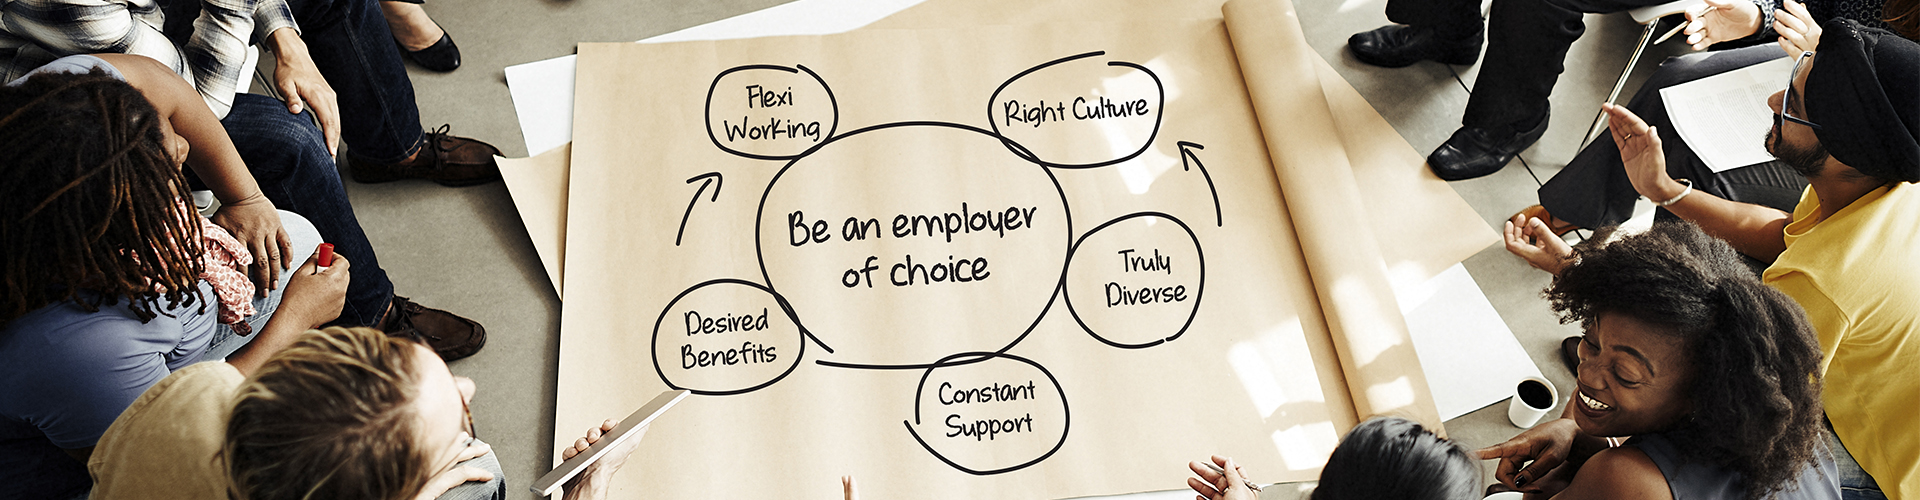 Why its vital to be an employer of choice?